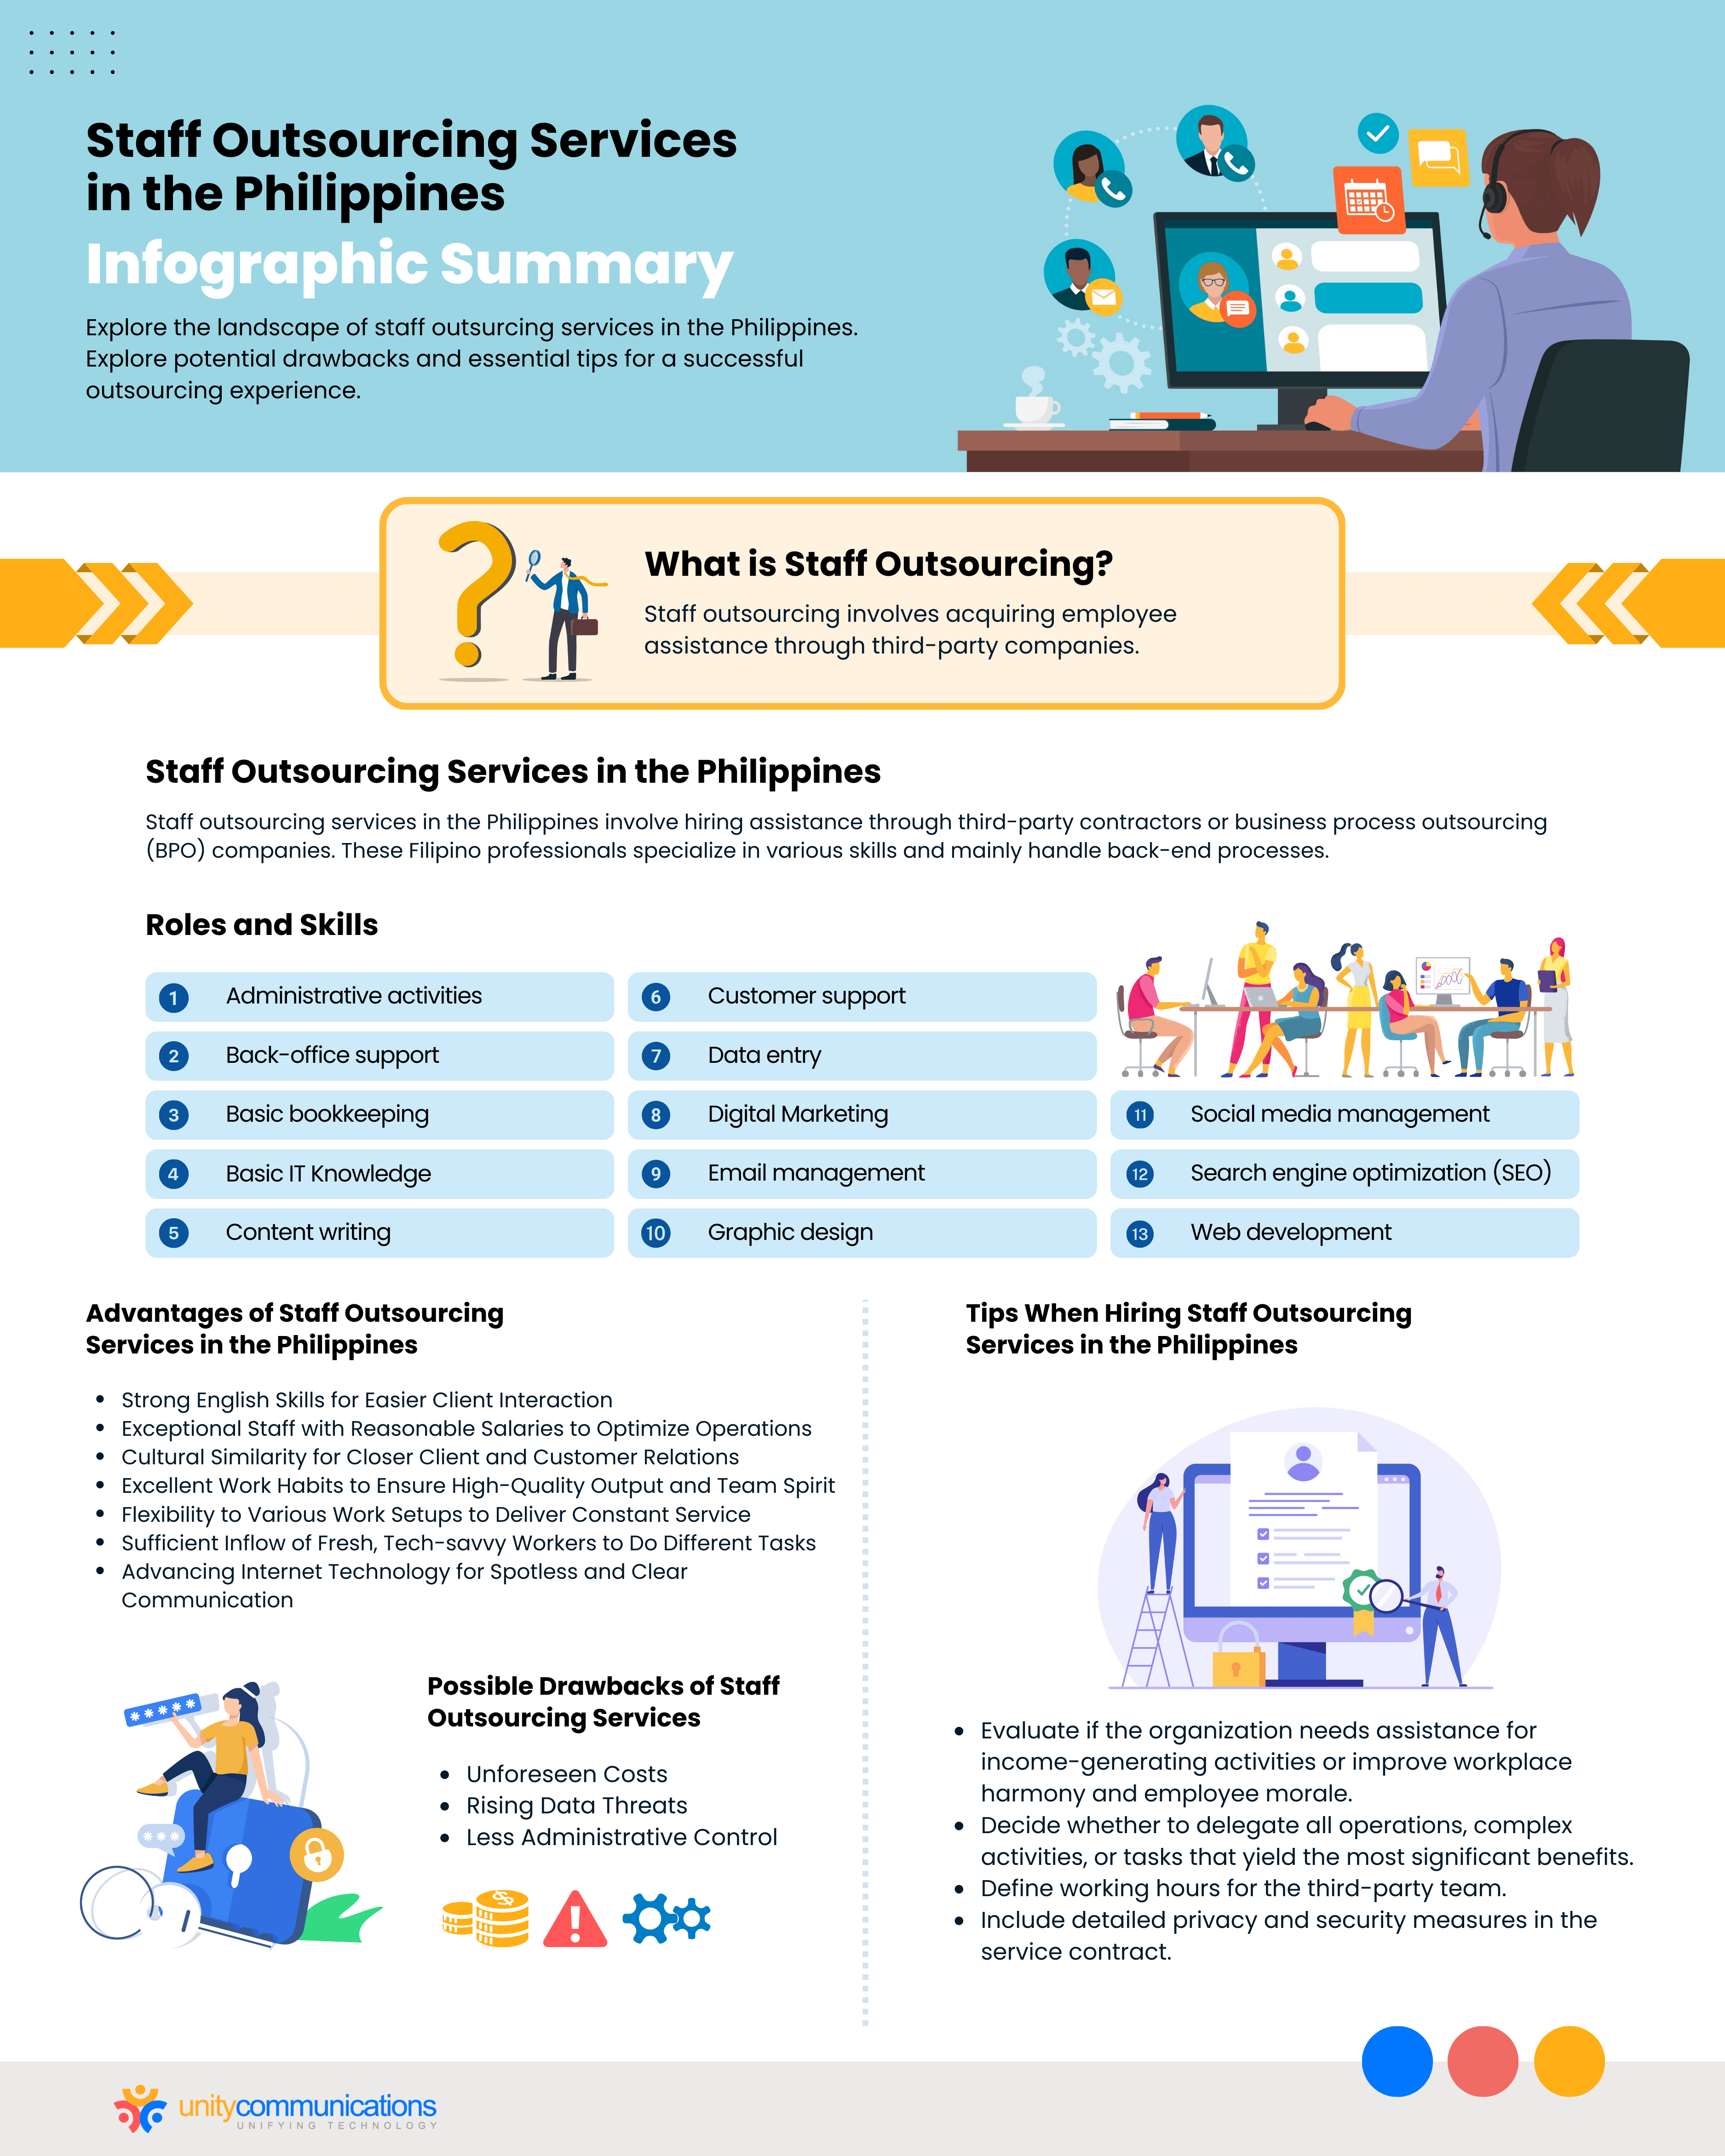 Staff Outsourcing Services in the Philippines: Infographic Summary